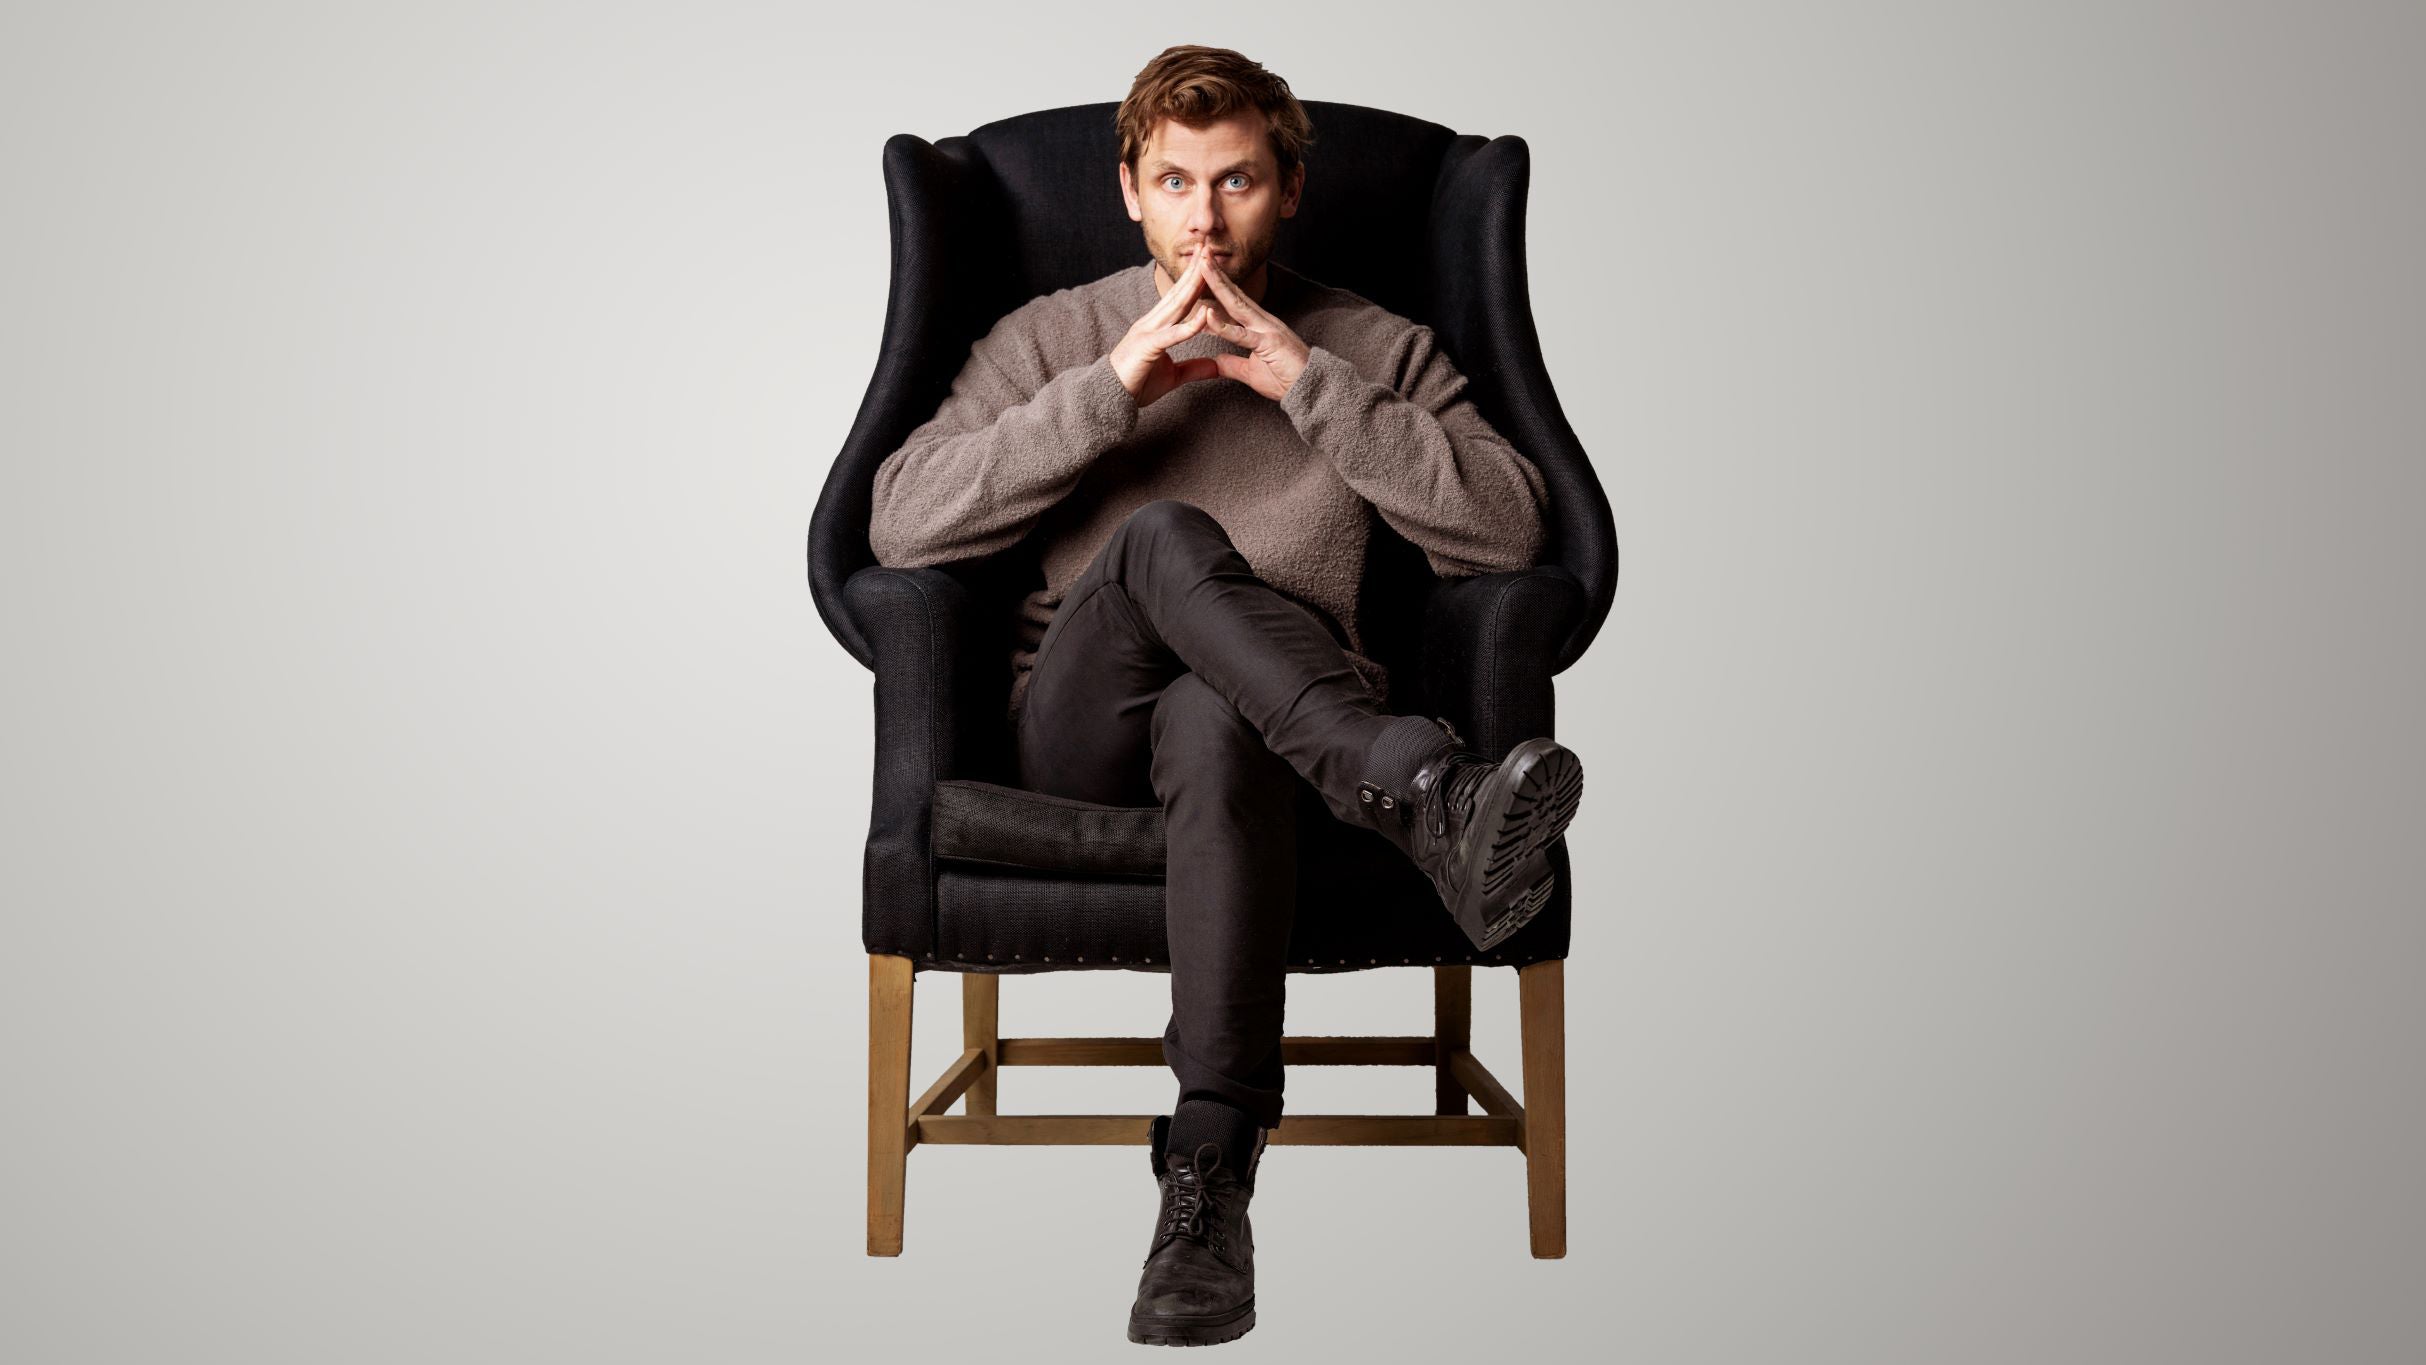 Charlie Berens: Good Old Fashioned Tour free pre-sale password for early tickets in Burnsville